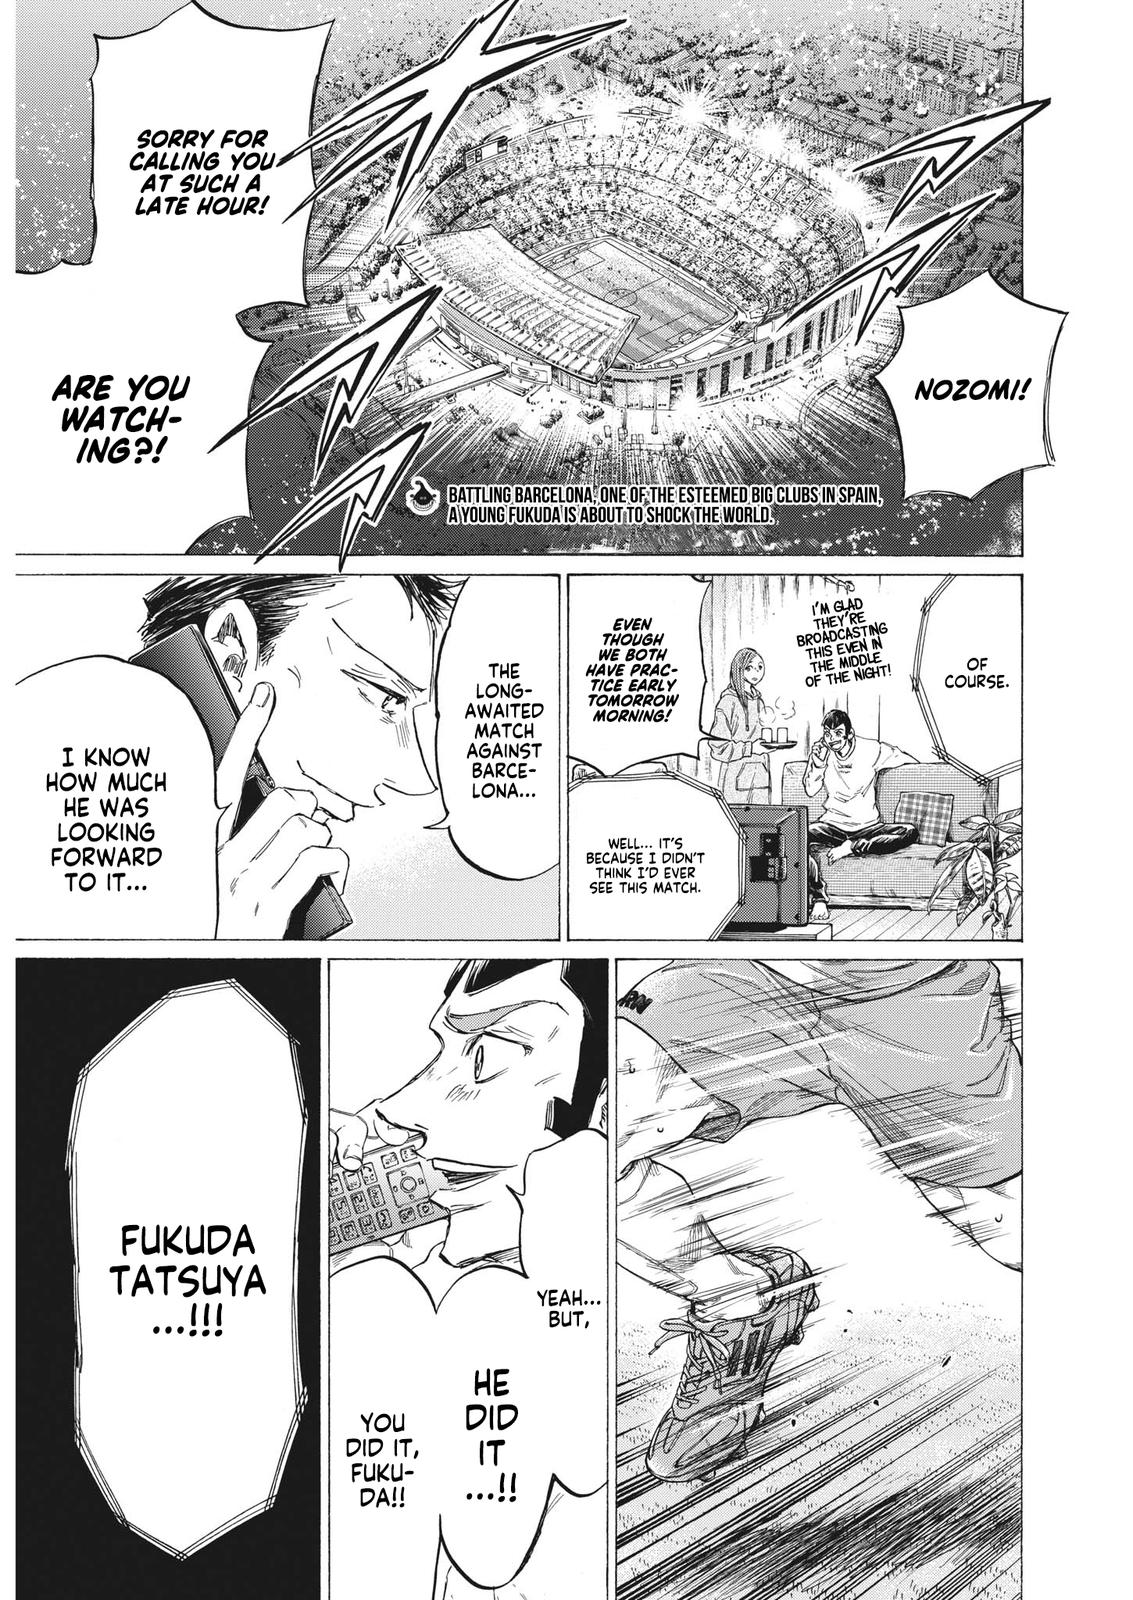 Ao Ashi, Chapter 297  TcbScans Org - Free Manga Online in High